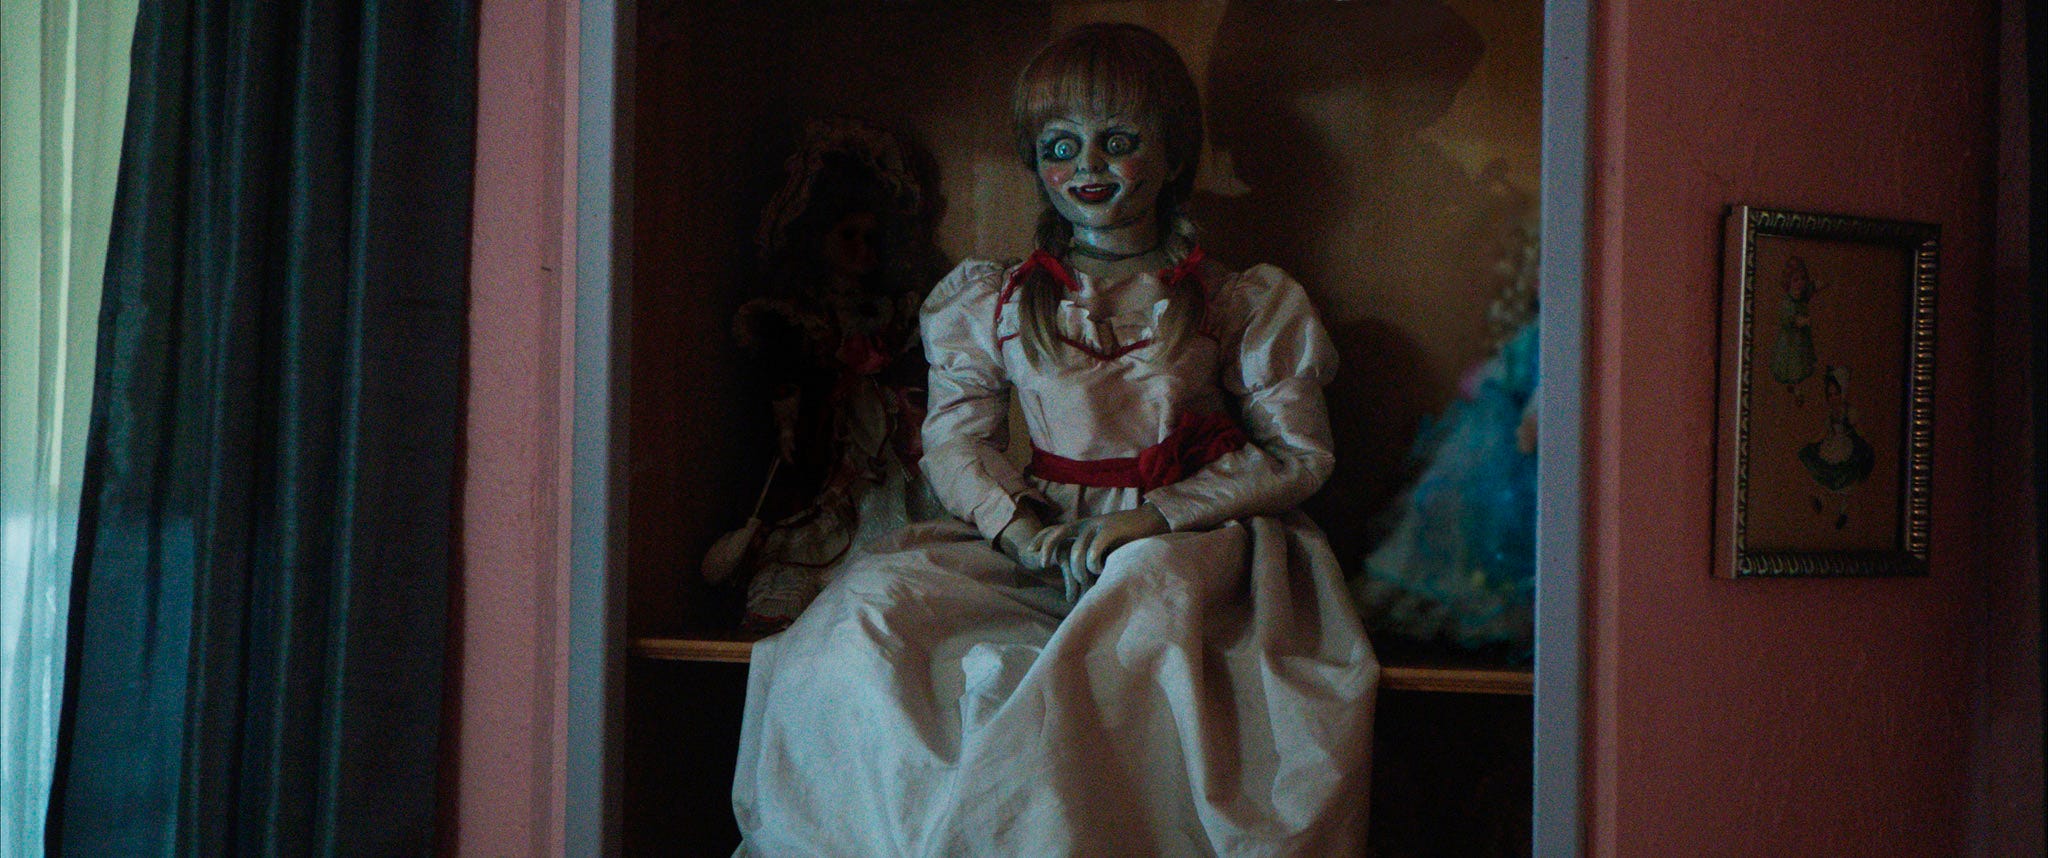 the scary doll